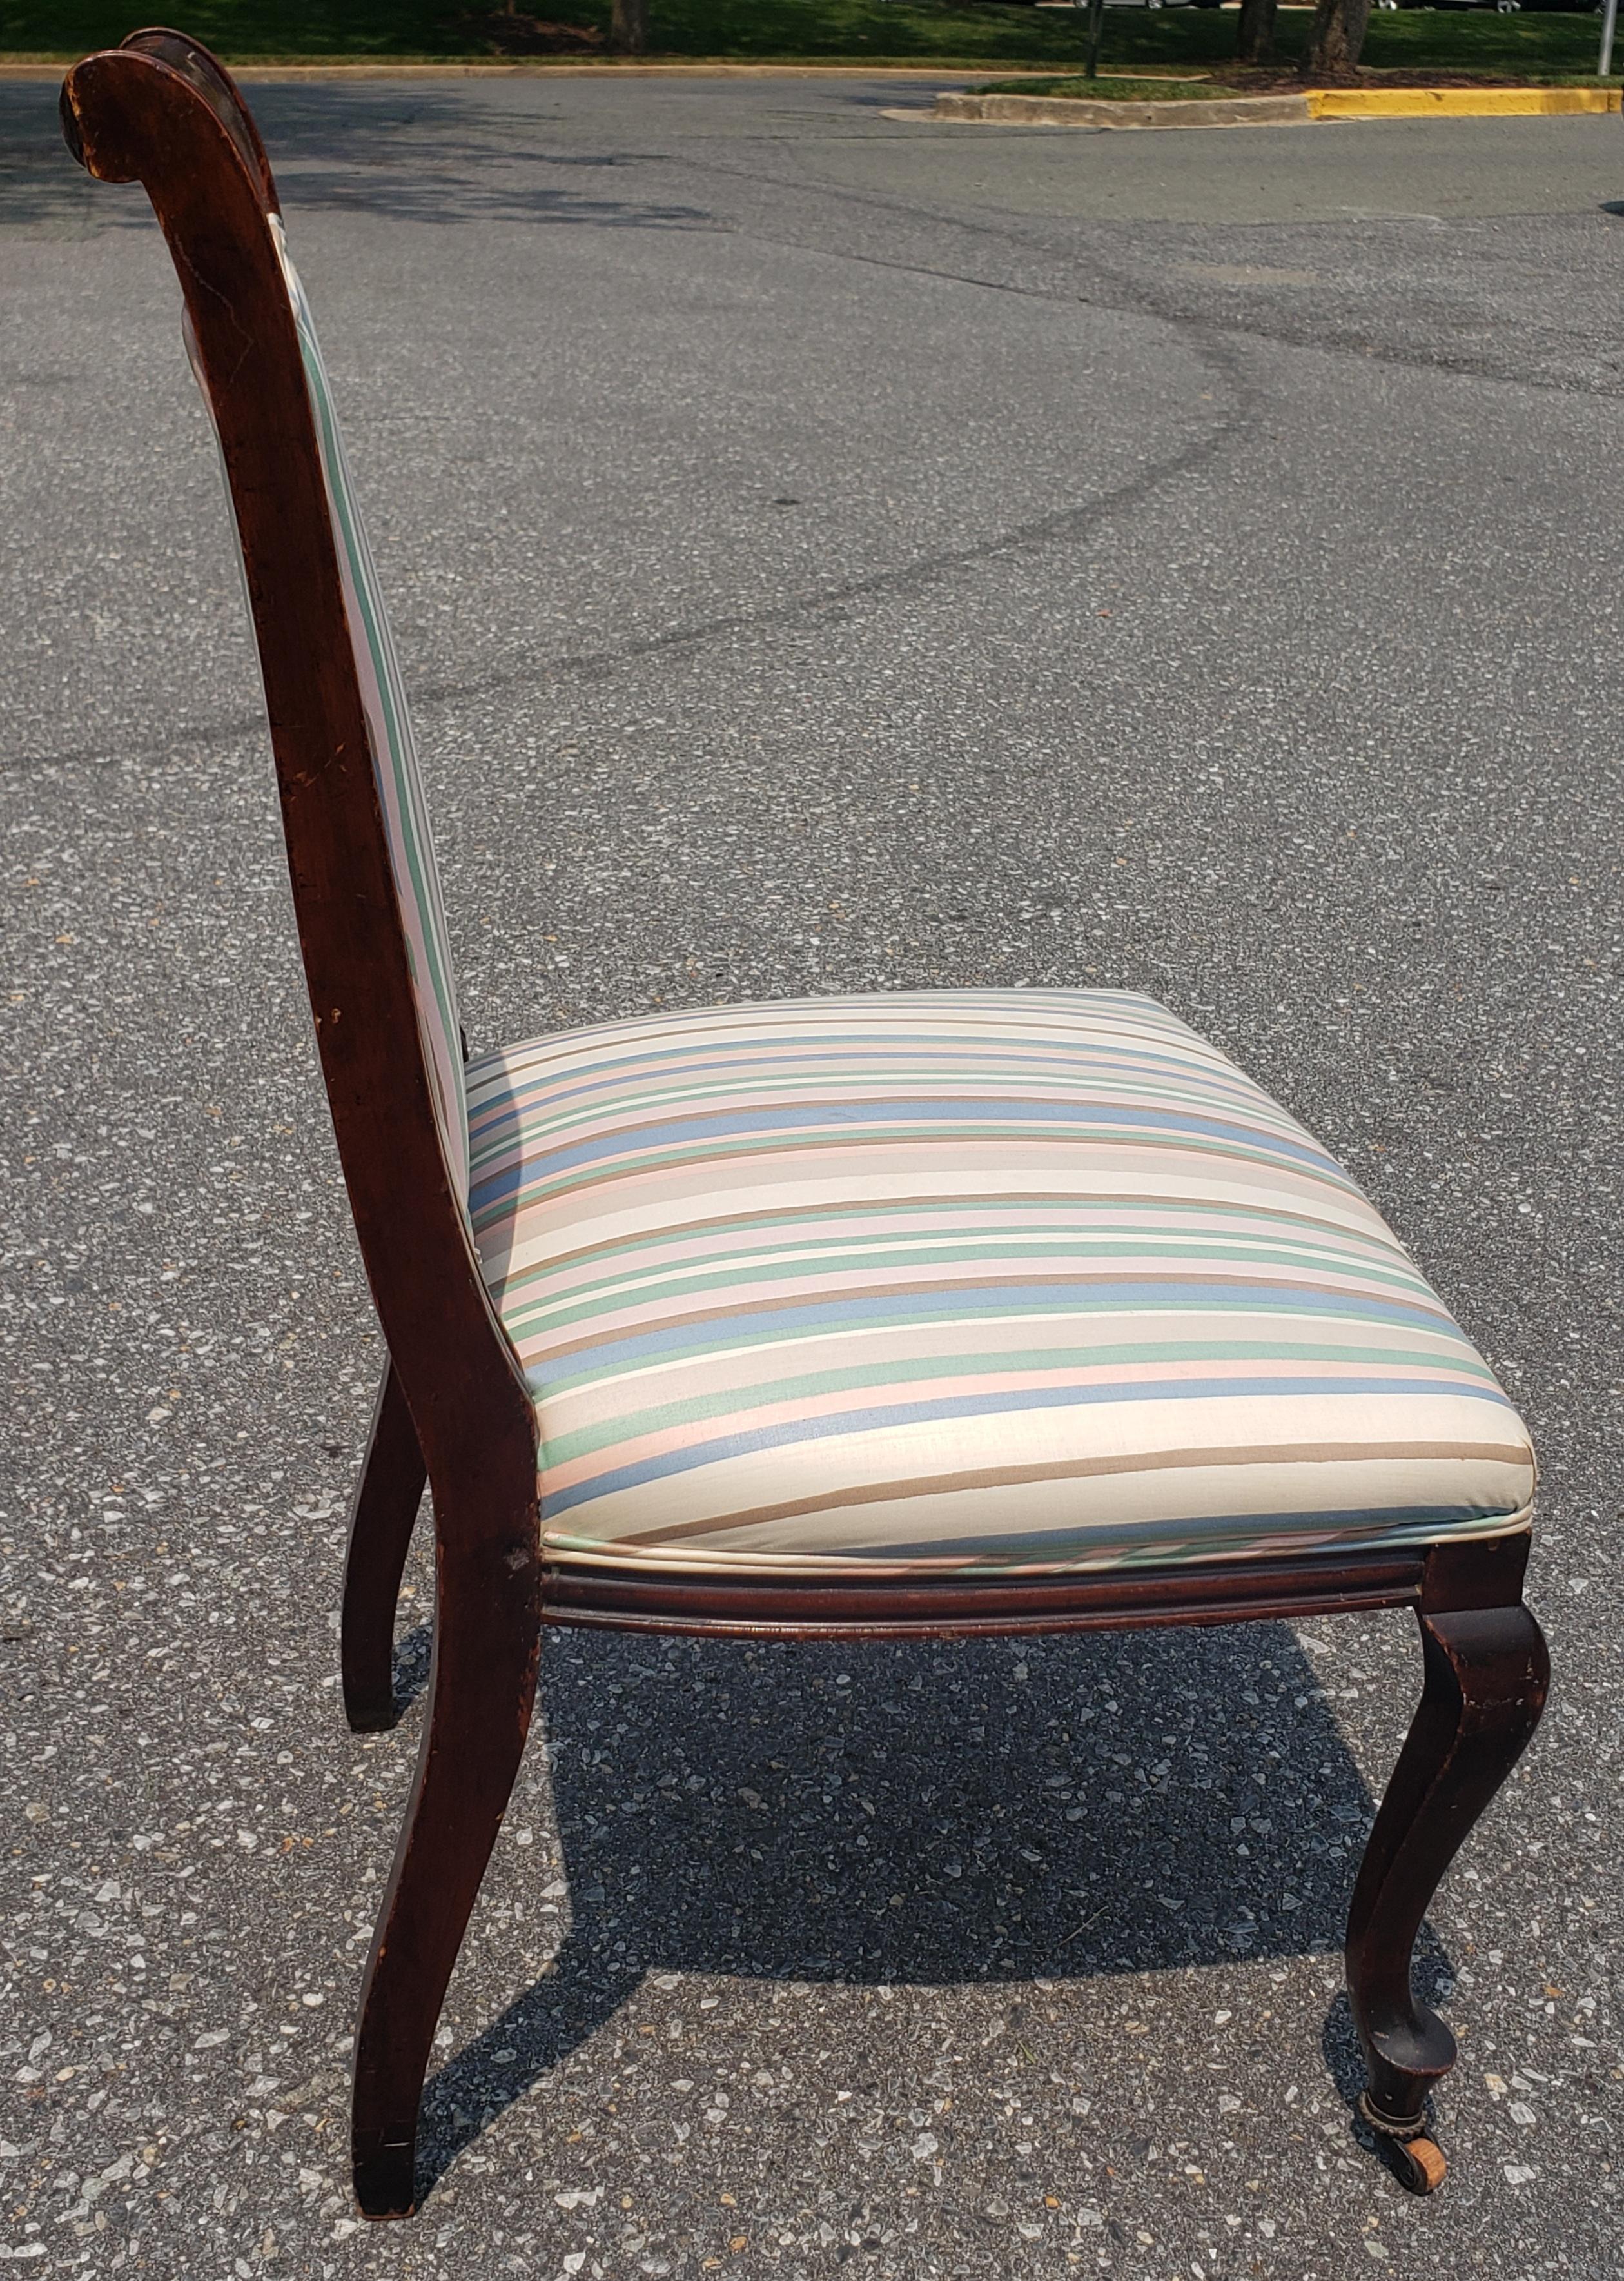 Edwardian Mahogany Mother-Of-Pearl And Satinwood Inlaid Upholstered Side Chair  In Good Condition For Sale In Germantown, MD